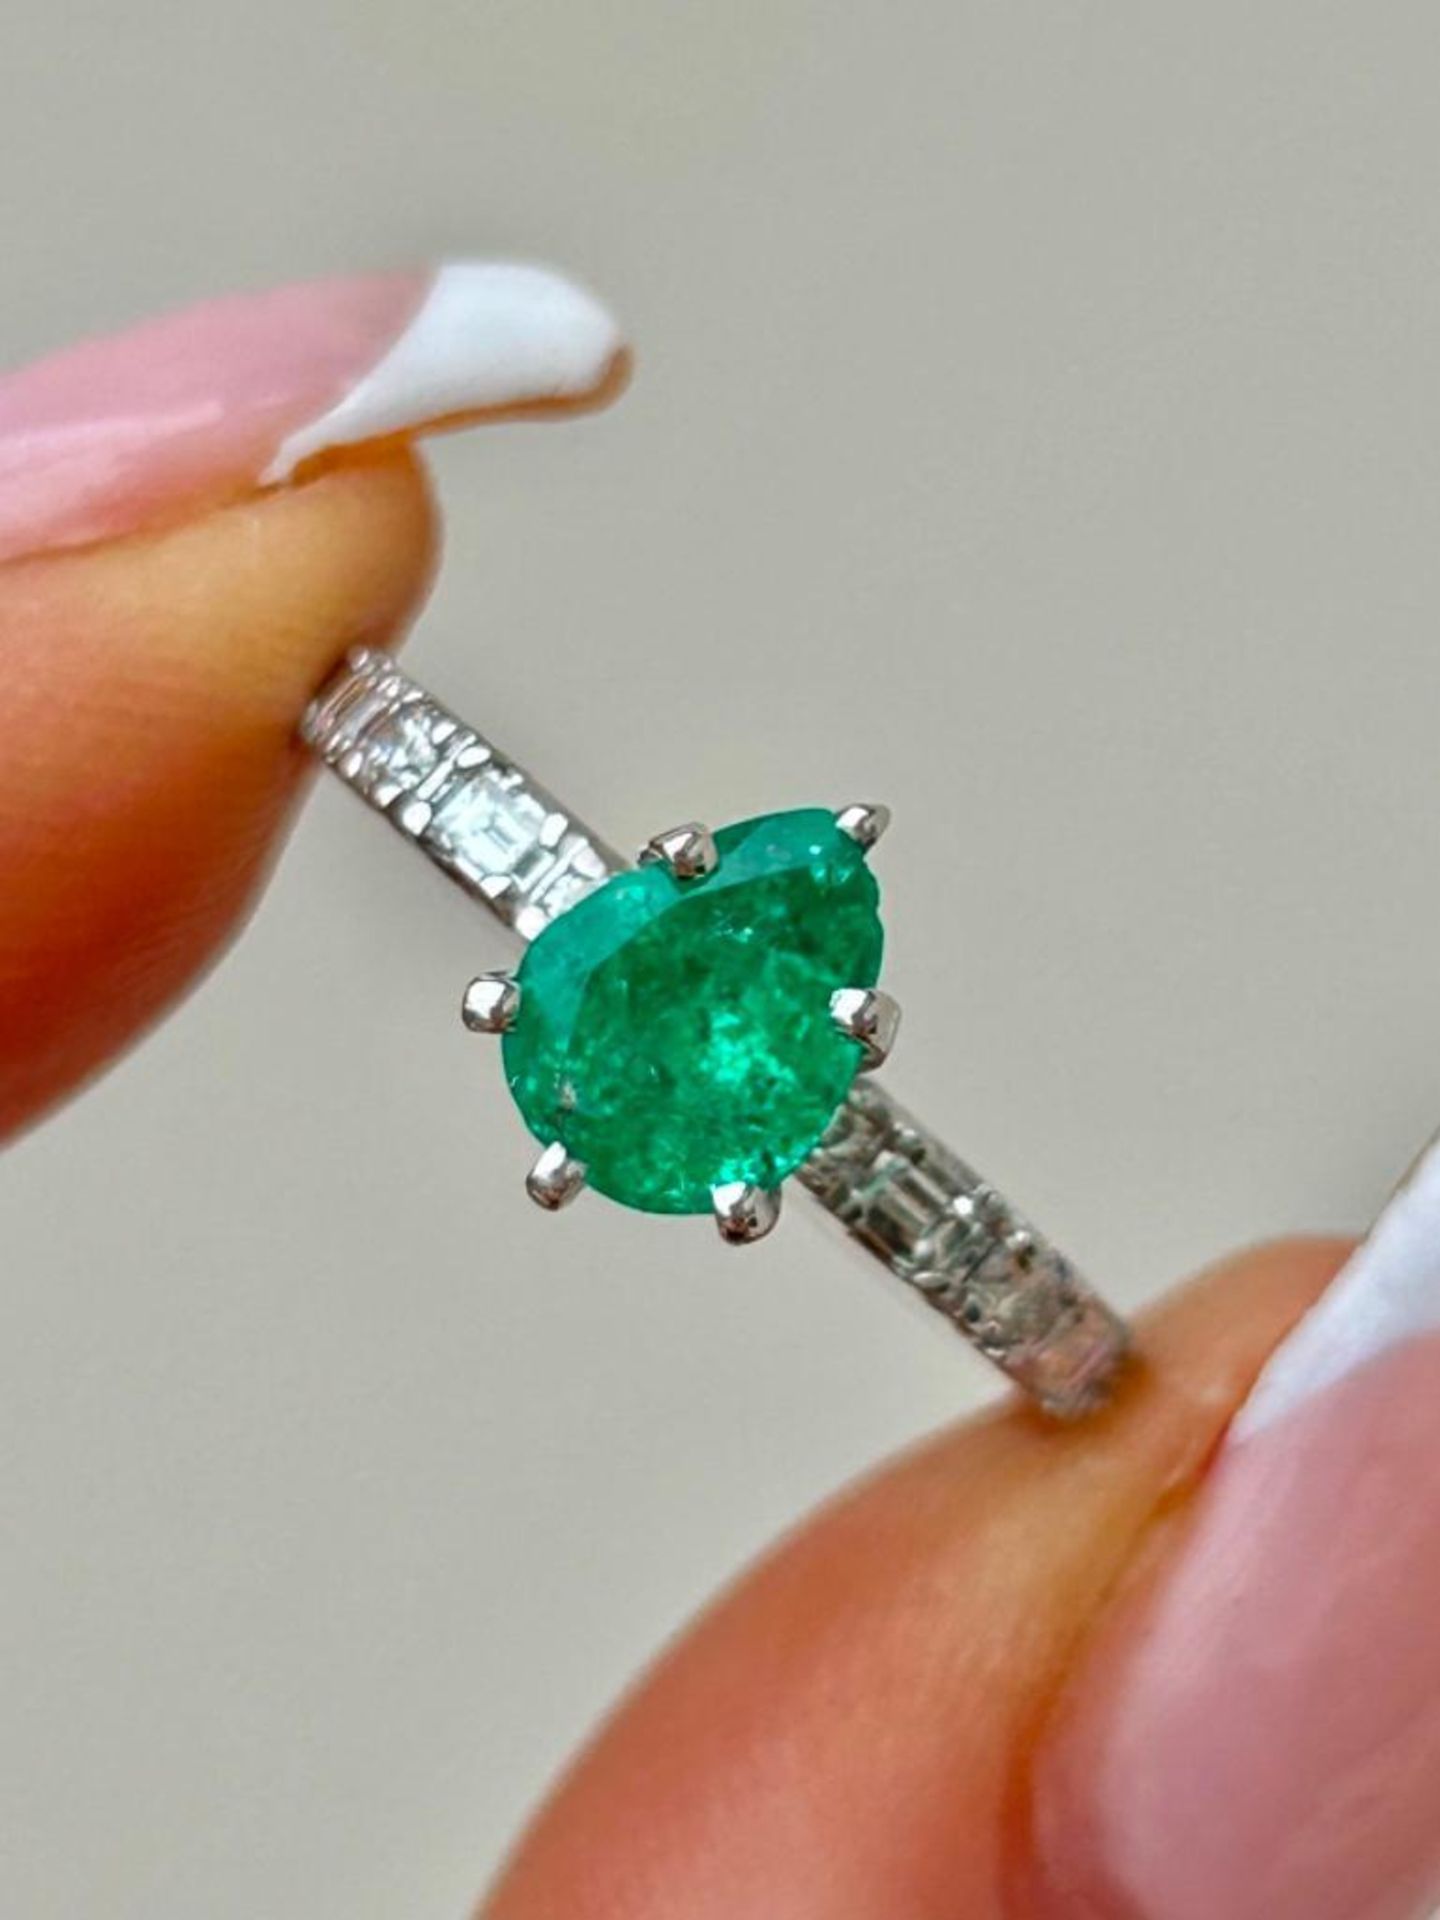 Outstanding 14k White Gold Emerald and Diamond Ring - Image 5 of 7